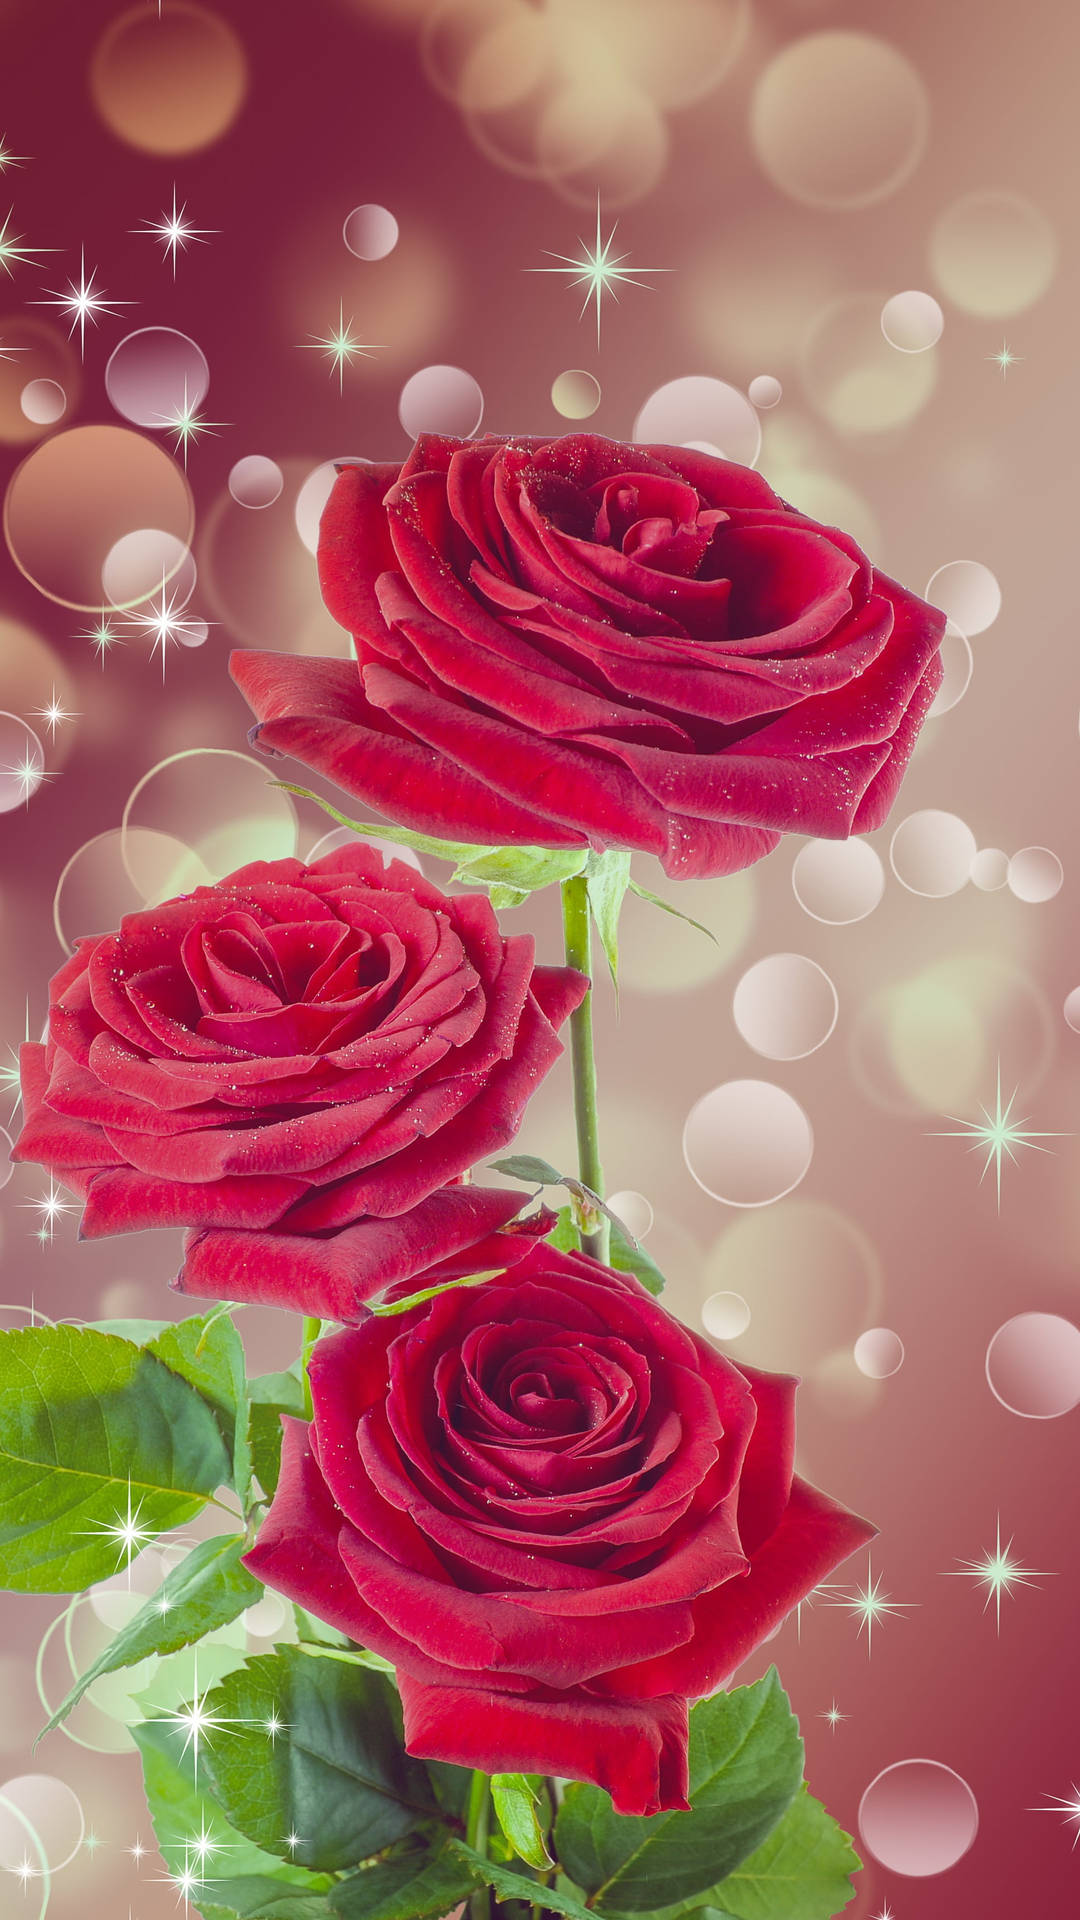 Roses And Sparkles Flower Mobile Background